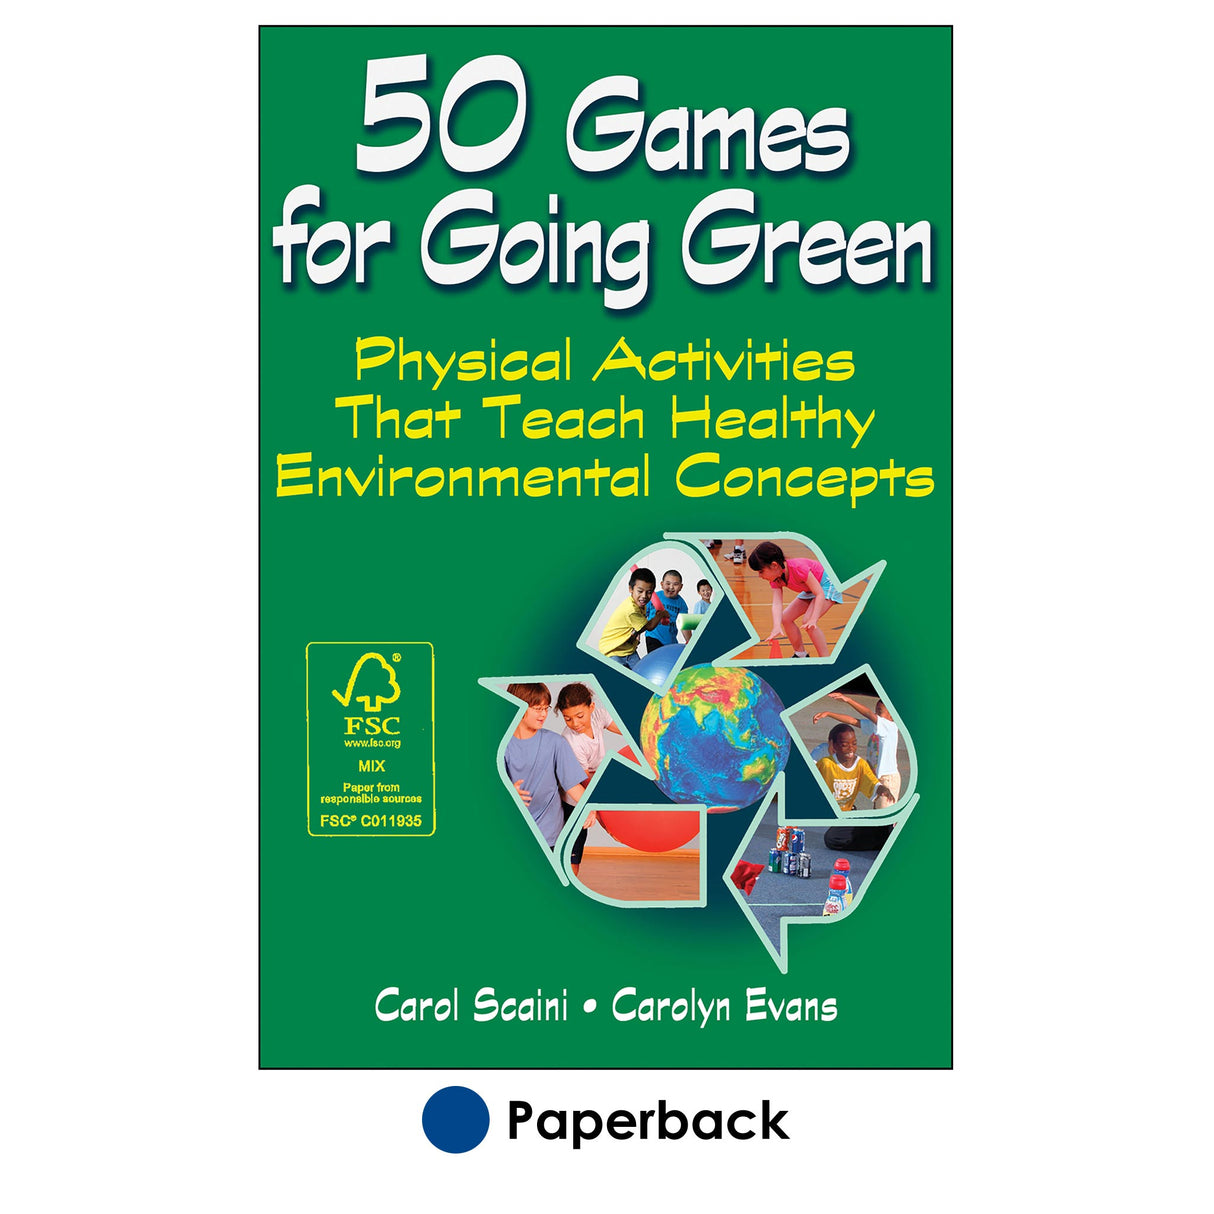 50 Games for Going Green